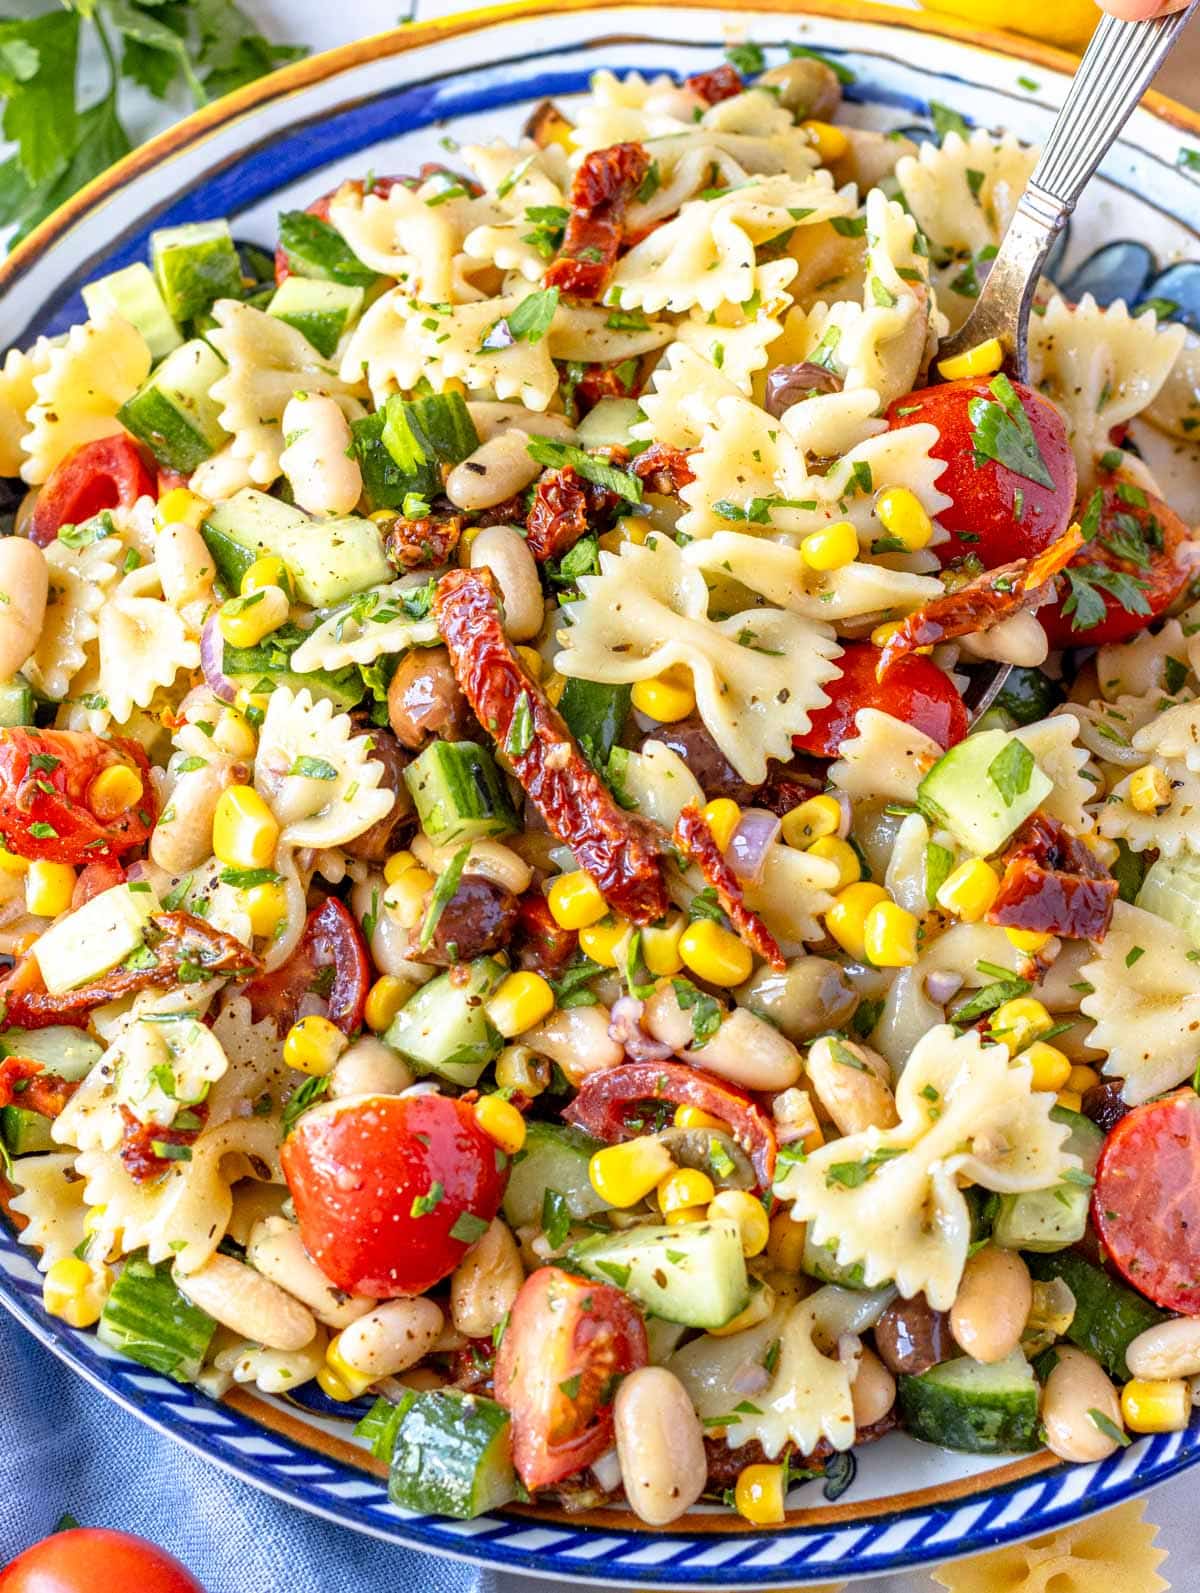 easy pasta salad with cherry tomatoes and white beans on a blue plate